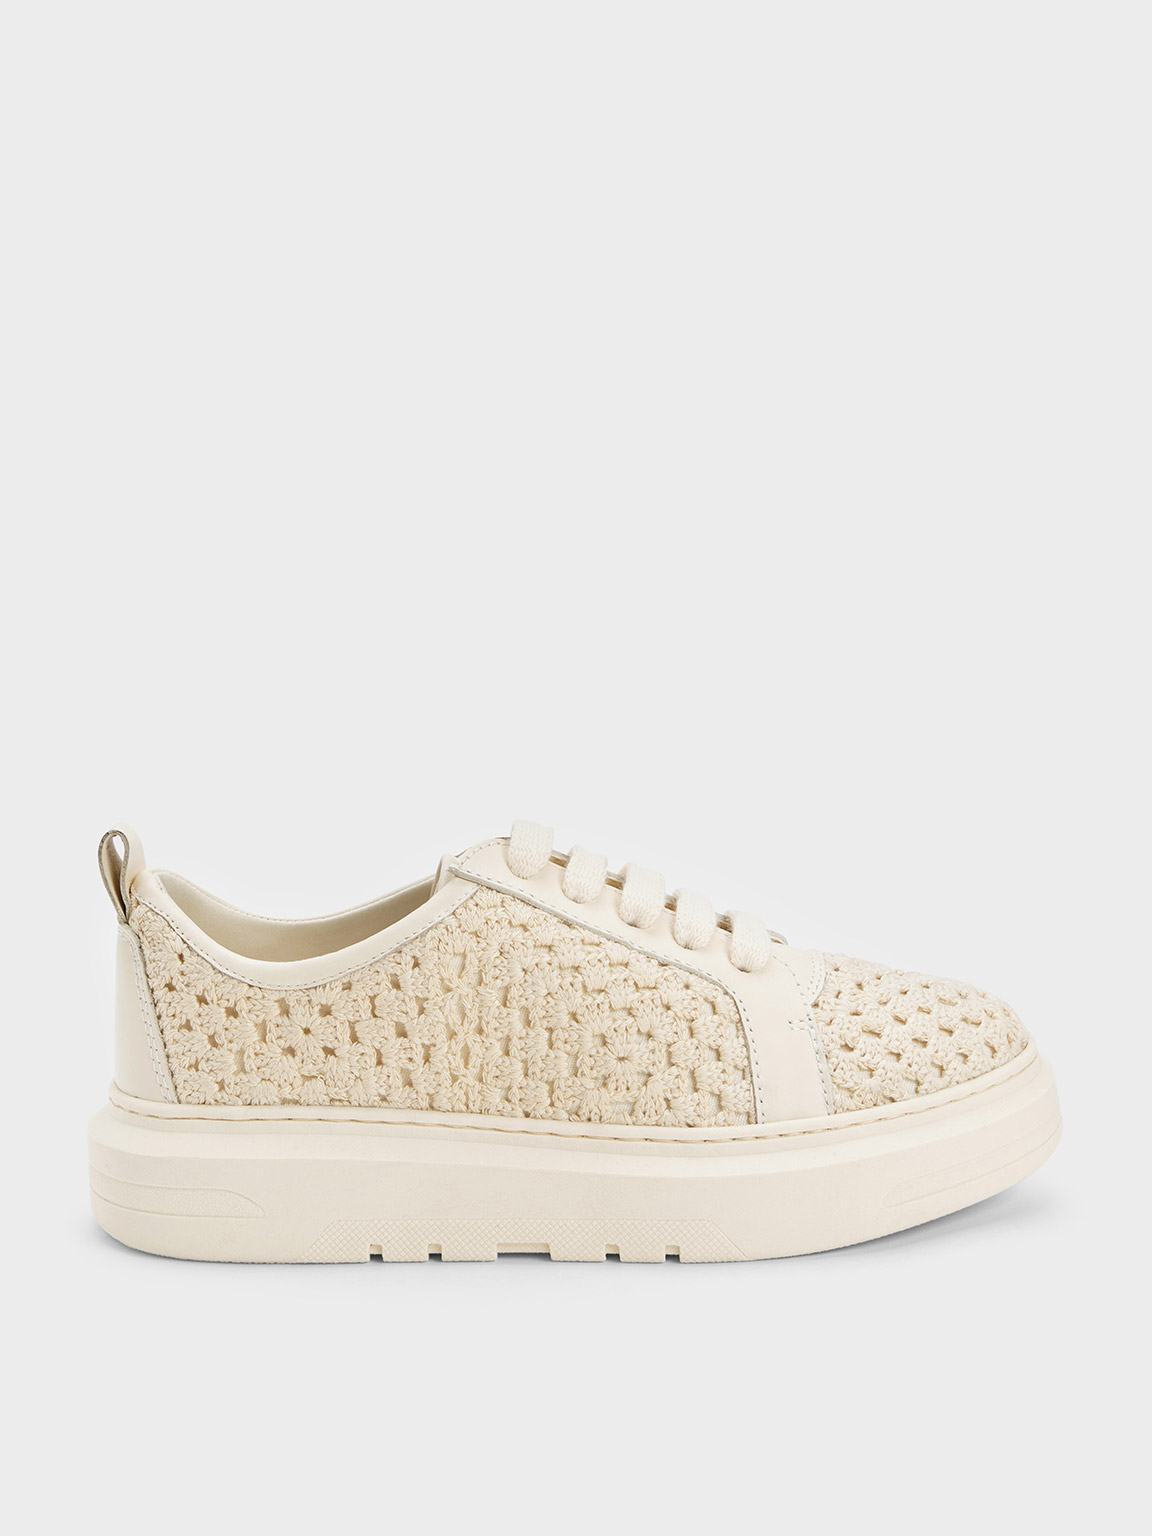 & Leather & US - Chalk CHARLES Sneakers Crochet KEITH